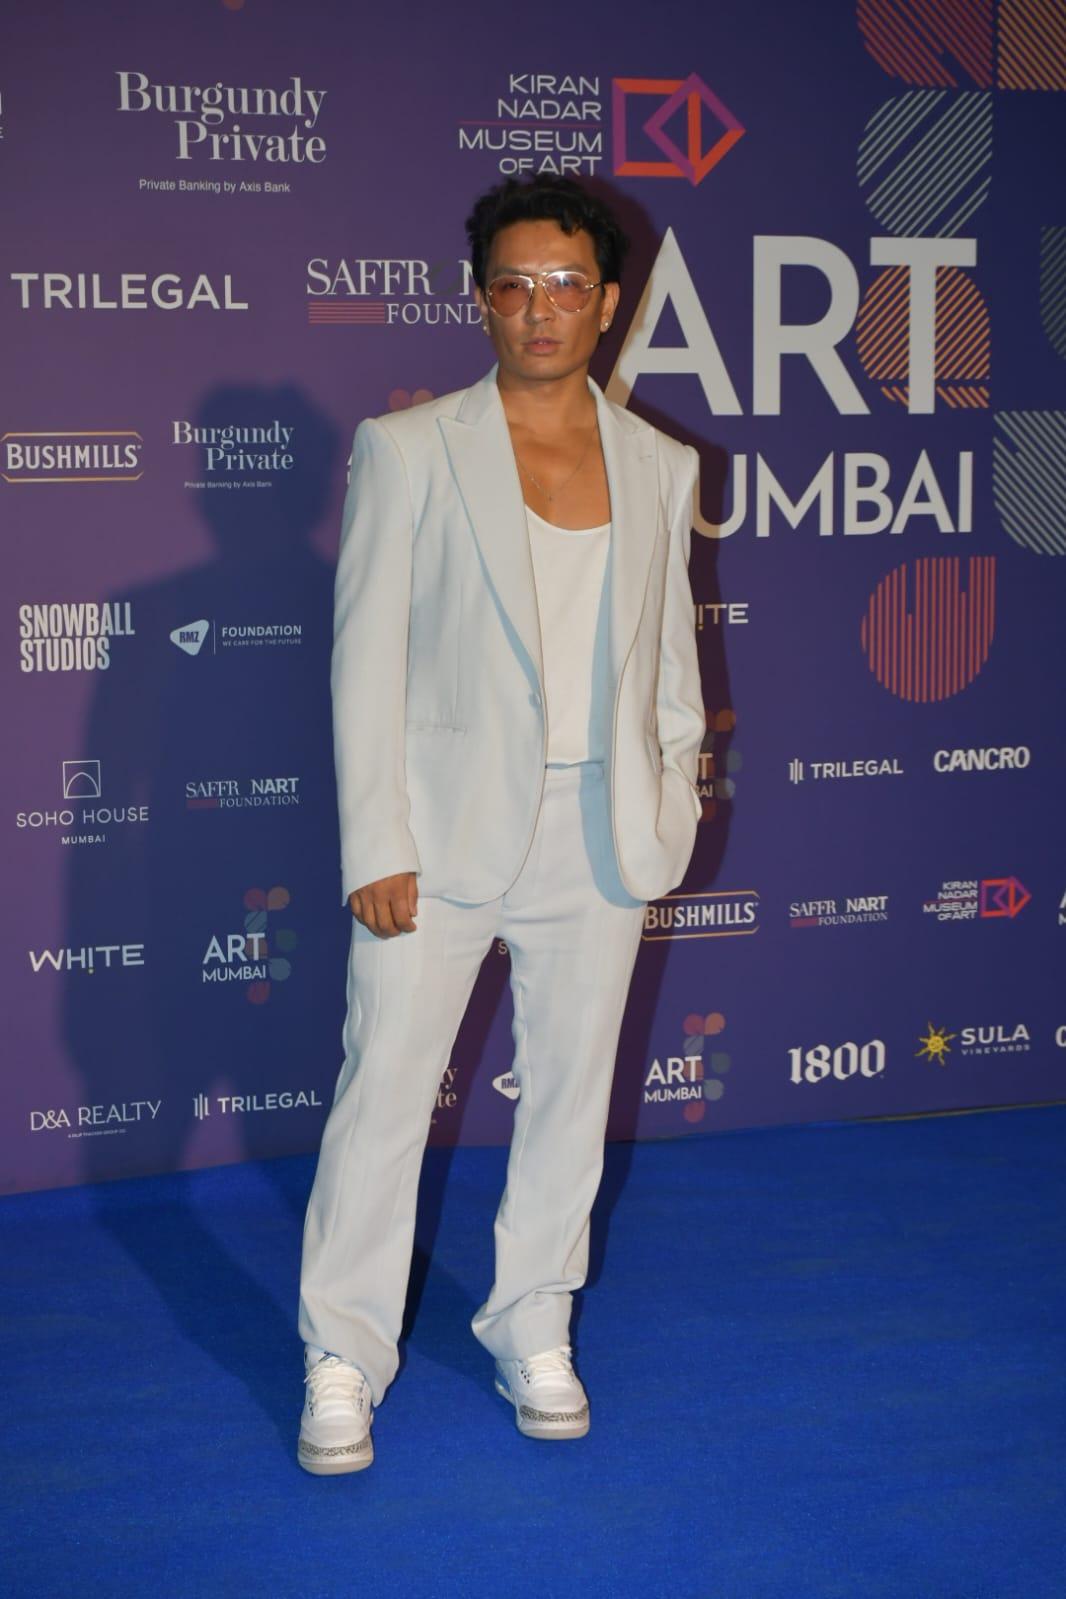 Fashion maestro, Prabul Gurang showed up at the event looking like a vision in white